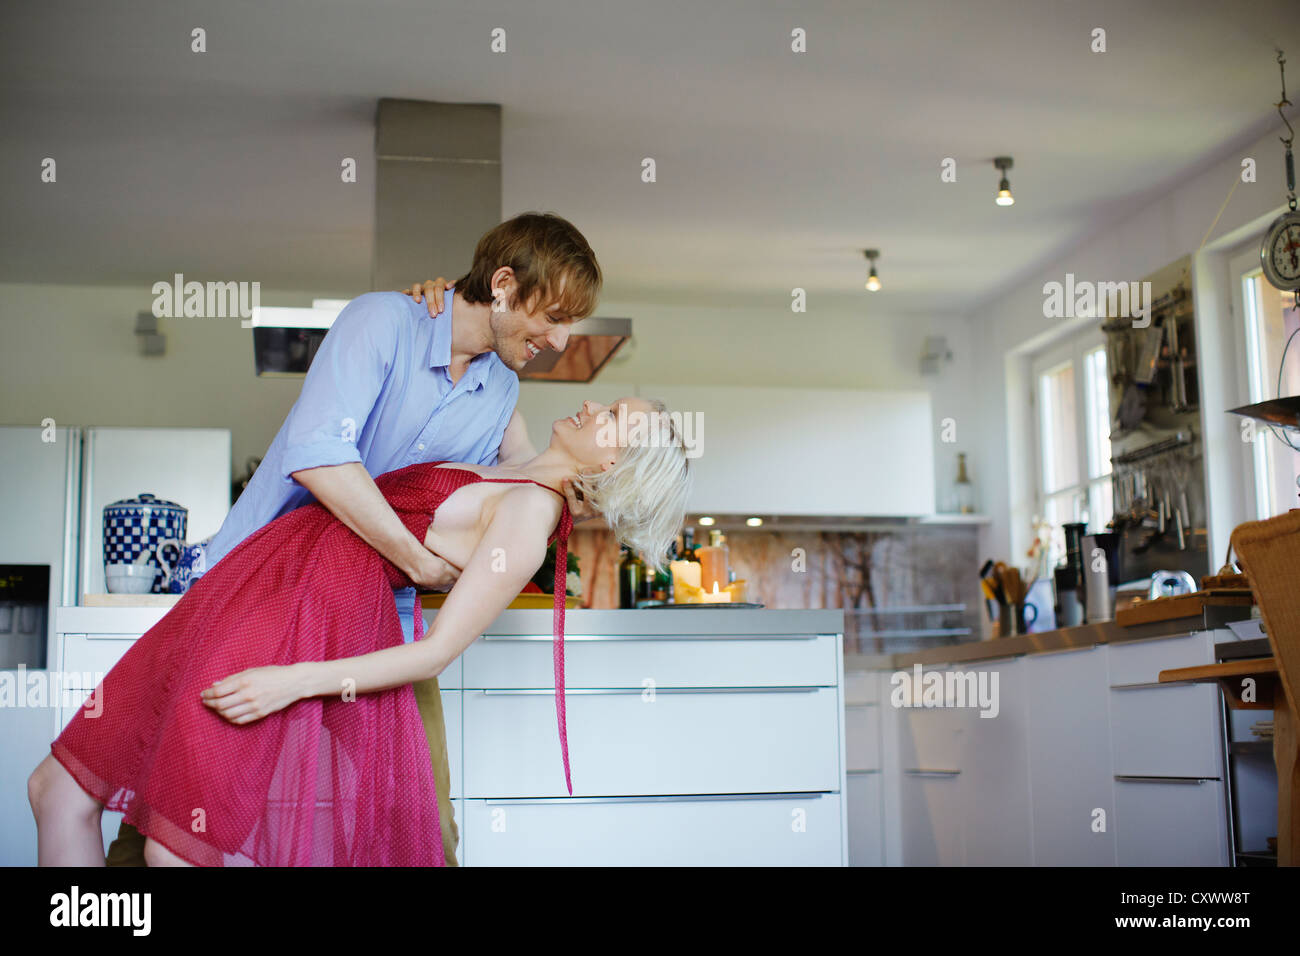 Couple dancing together in kitchen Banque D'Images